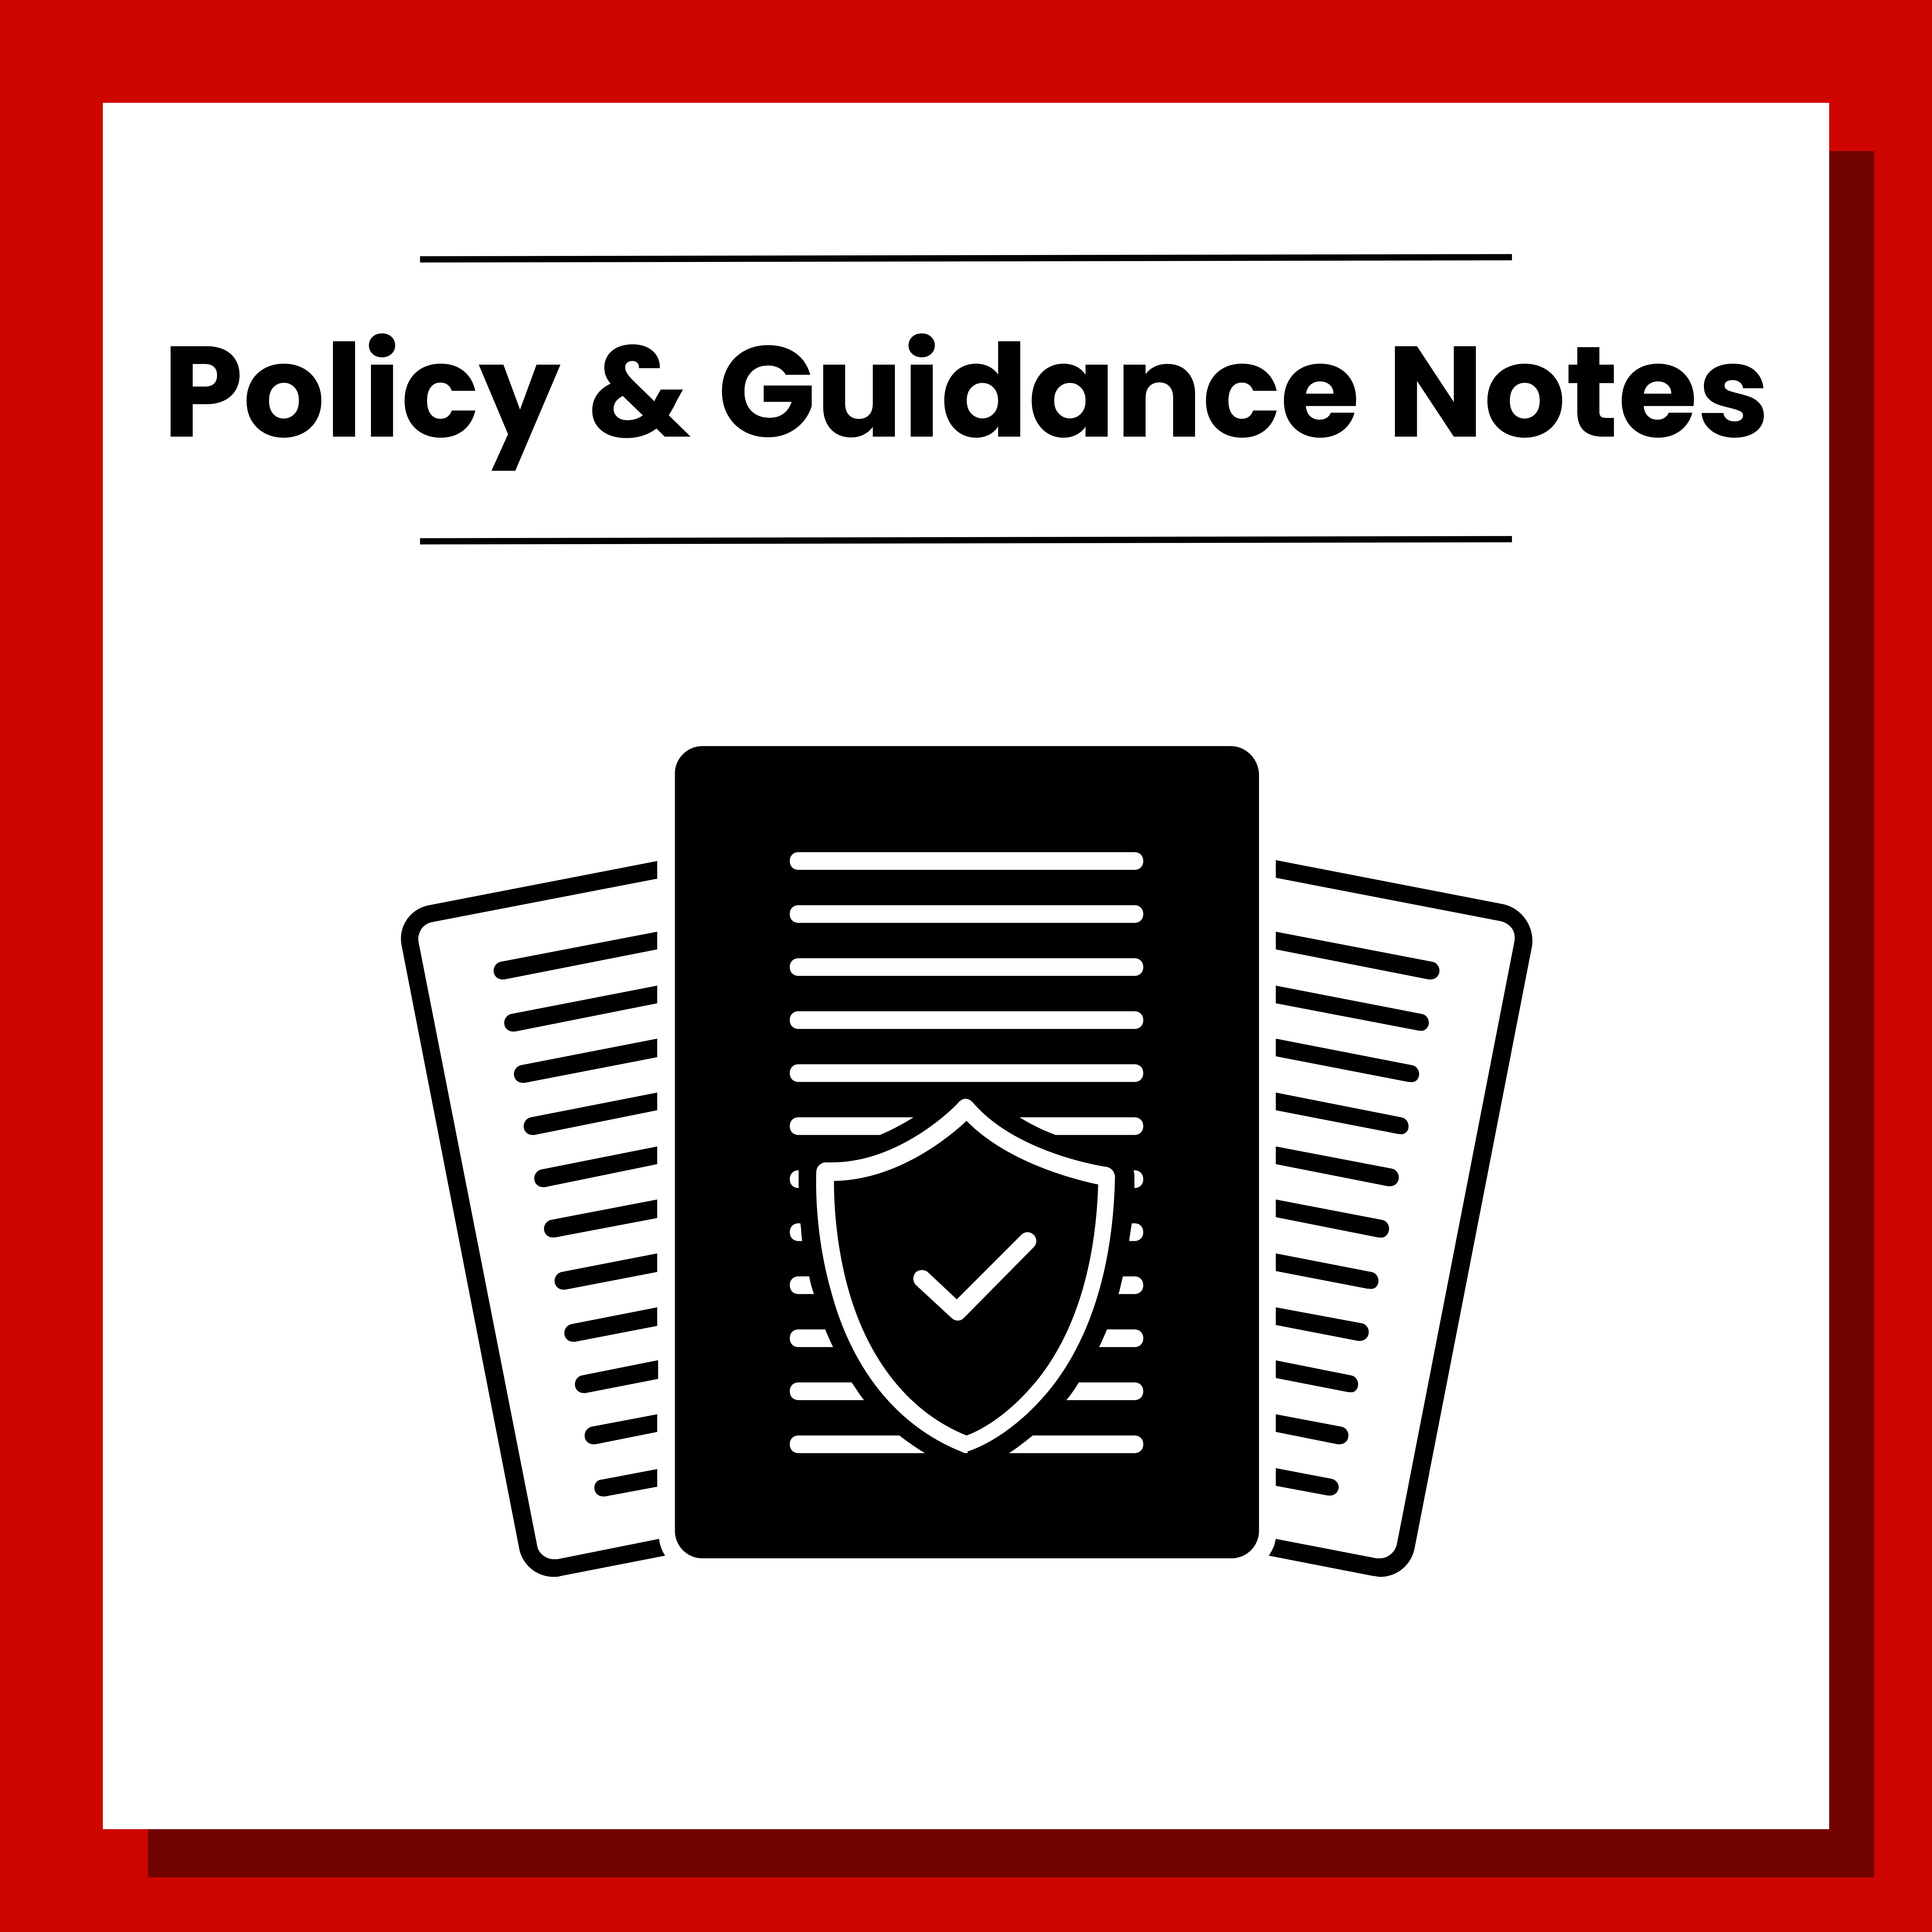 Click here to view the policy and guidance notes